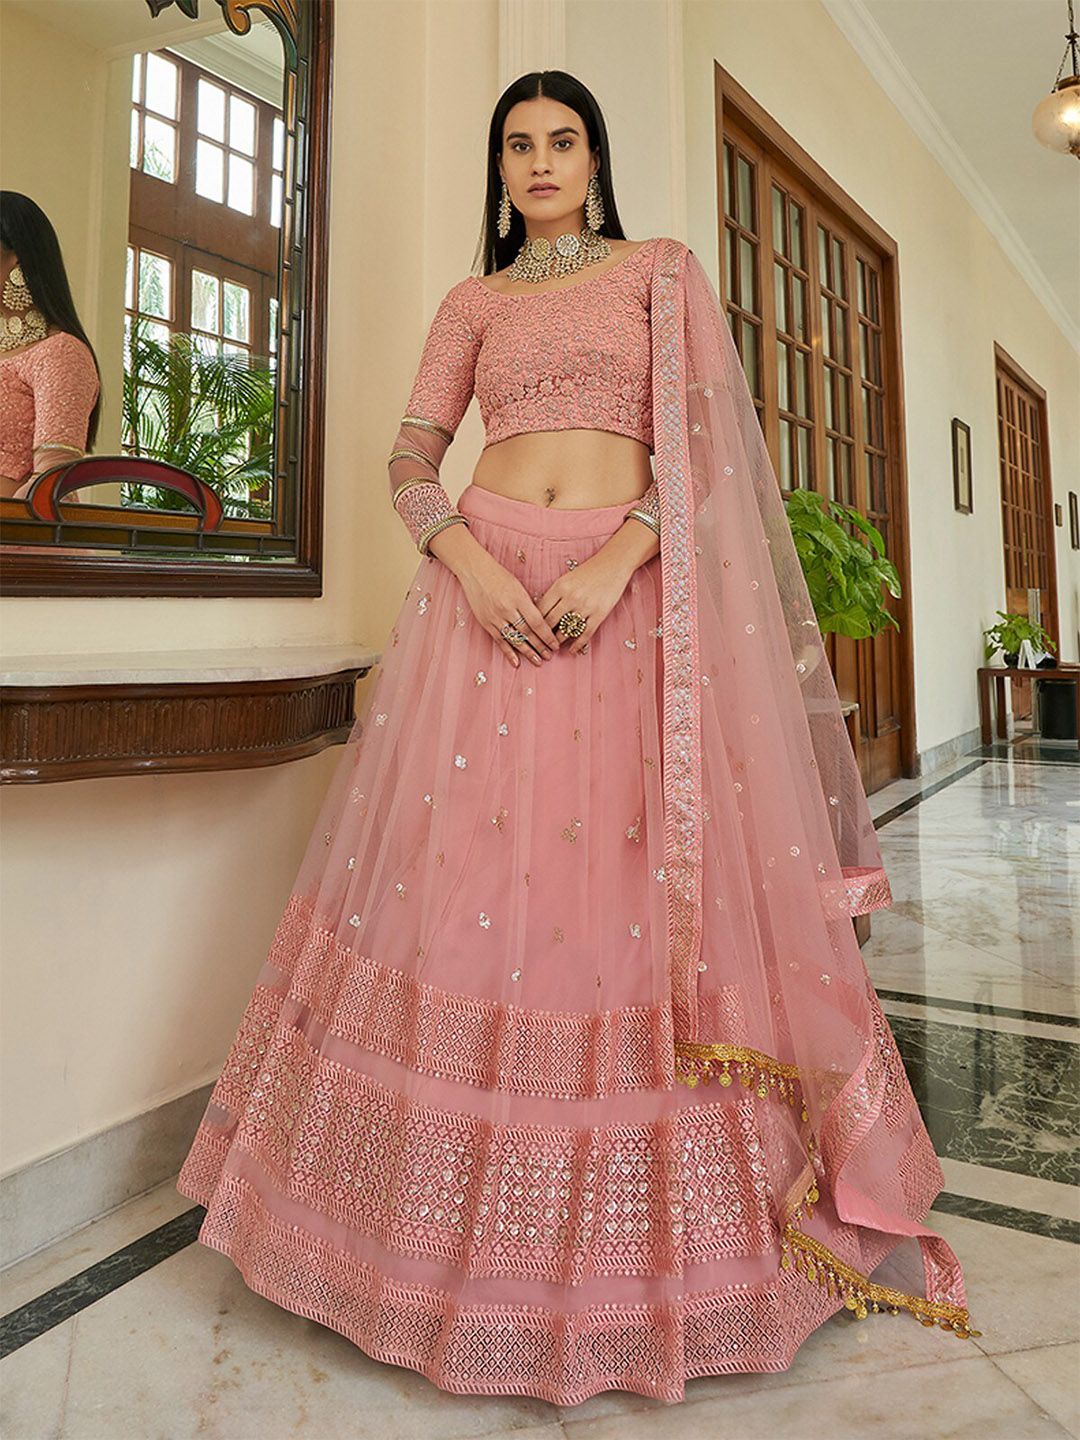 ODETTE Embroidered Semi-Stitched Lehenga & Unstitched Blouse With Dupatta Price in India